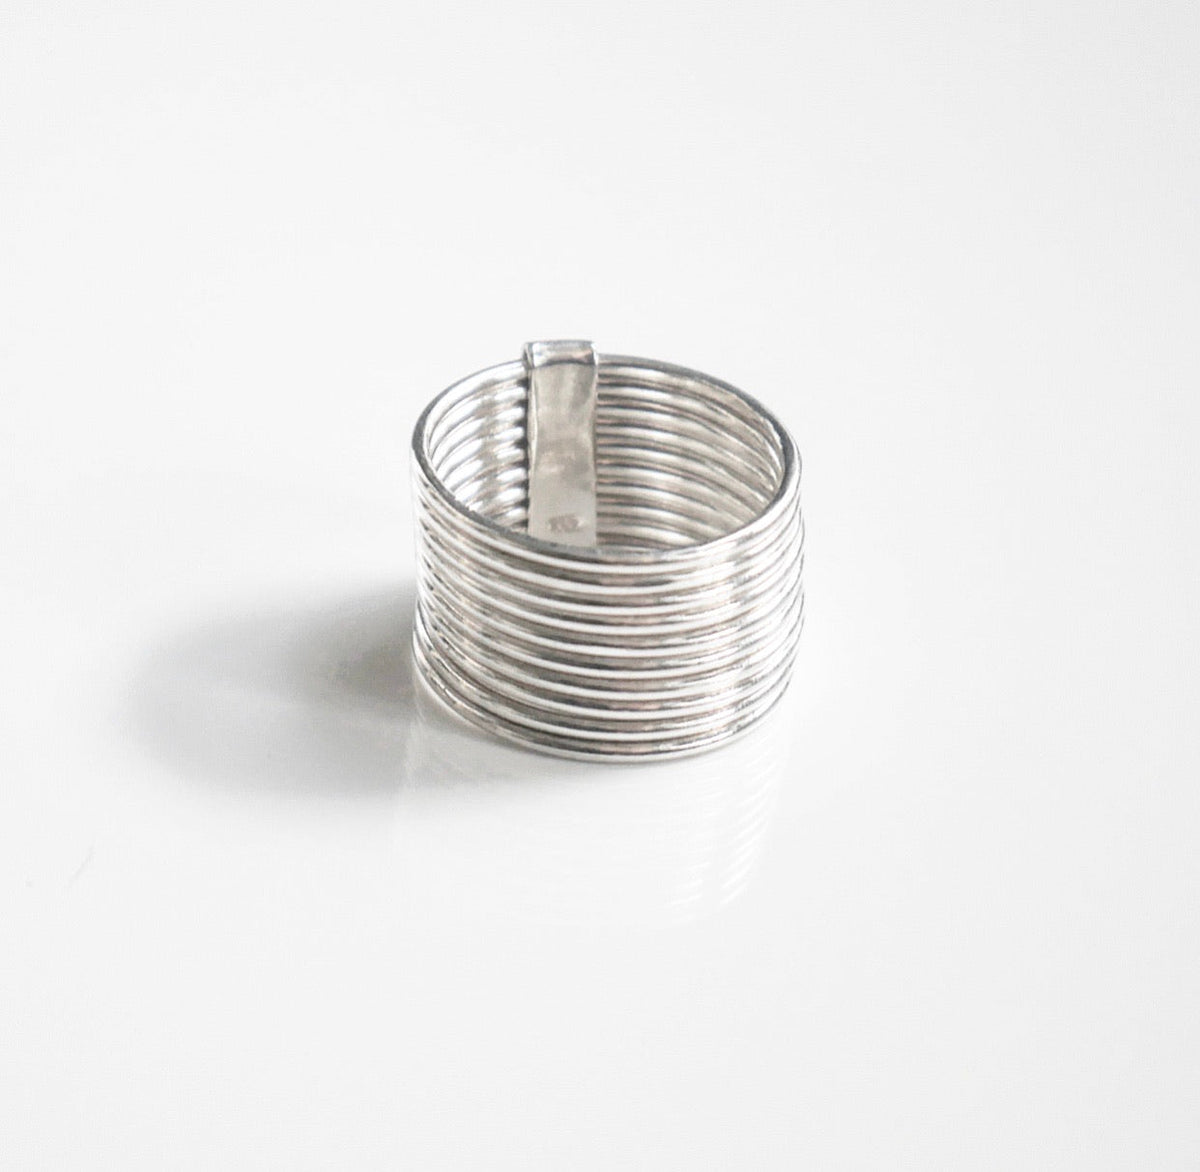 Stacked ring in sterling silver, sterling silver stacked ring, long ring, multiple rings, rings for her, birthday gifts, plain rings, nice sterling silver rings, popular sterling silver rings, popular jewelry store, popular jewelry, rings for men, shopping in Miami